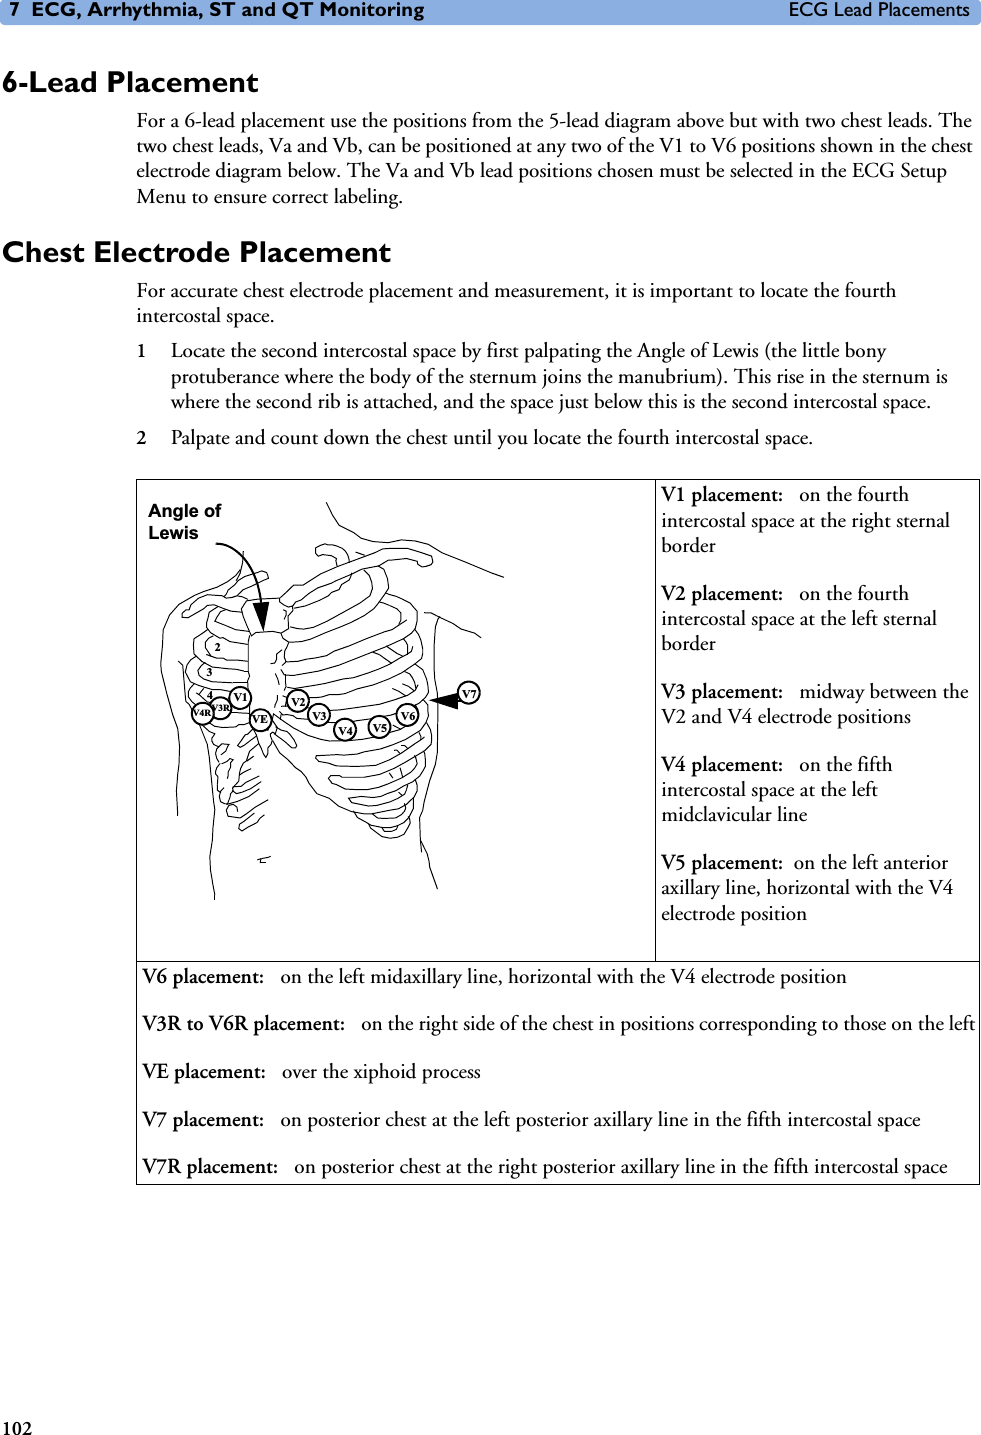 7 ECG, Arrhythmia, ST and QT Monitoring ECG Lead Placements1026-Lead PlacementFor a 6-lead placement use the positions from the 5-lead diagram above but with two chest leads. The two chest leads, Va and Vb, can be positioned at any two of the V1 to V6 positions shown in the chest electrode diagram below. The Va and Vb lead positions chosen must be selected in the ECG Setup Menu to ensure correct labeling. Chest Electrode PlacementFor accurate chest electrode placement and measurement, it is important to locate the fourth intercostal space. 1Locate the second intercostal space by first palpating the Angle of Lewis (the little bony protuberance where the body of the sternum joins the manubrium). This rise in the sternum is where the second rib is attached, and the space just below this is the second intercostal space. 2Palpate and count down the chest until you locate the fourth intercostal space.V1 placement:  on the fourth intercostal space at the right sternal borderV2 placement:  on the fourth intercostal space at the left sternal borderV3 placement:  midway between the V2 and V4 electrode positionsV4 placement:  on the fifth intercostal space at the left midclavicular lineV5 placement: on the left anterior axillary line, horizontal with the V4 electrode positionV6 placement:  on the left midaxillary line, horizontal with the V4 electrode positionV3R to V6R placement:  on the right side of the chest in positions corresponding to those on the leftVE placement:  over the xiphoid processV7 placement:  on posterior chest at the left posterior axillary line in the fifth intercostal spaceV7R placement:  on posterior chest at the right posterior axillary line in the fifth intercostal spaceVEV1 V2V3V4 V5V6V7V3RV4R234Angle of Lewis